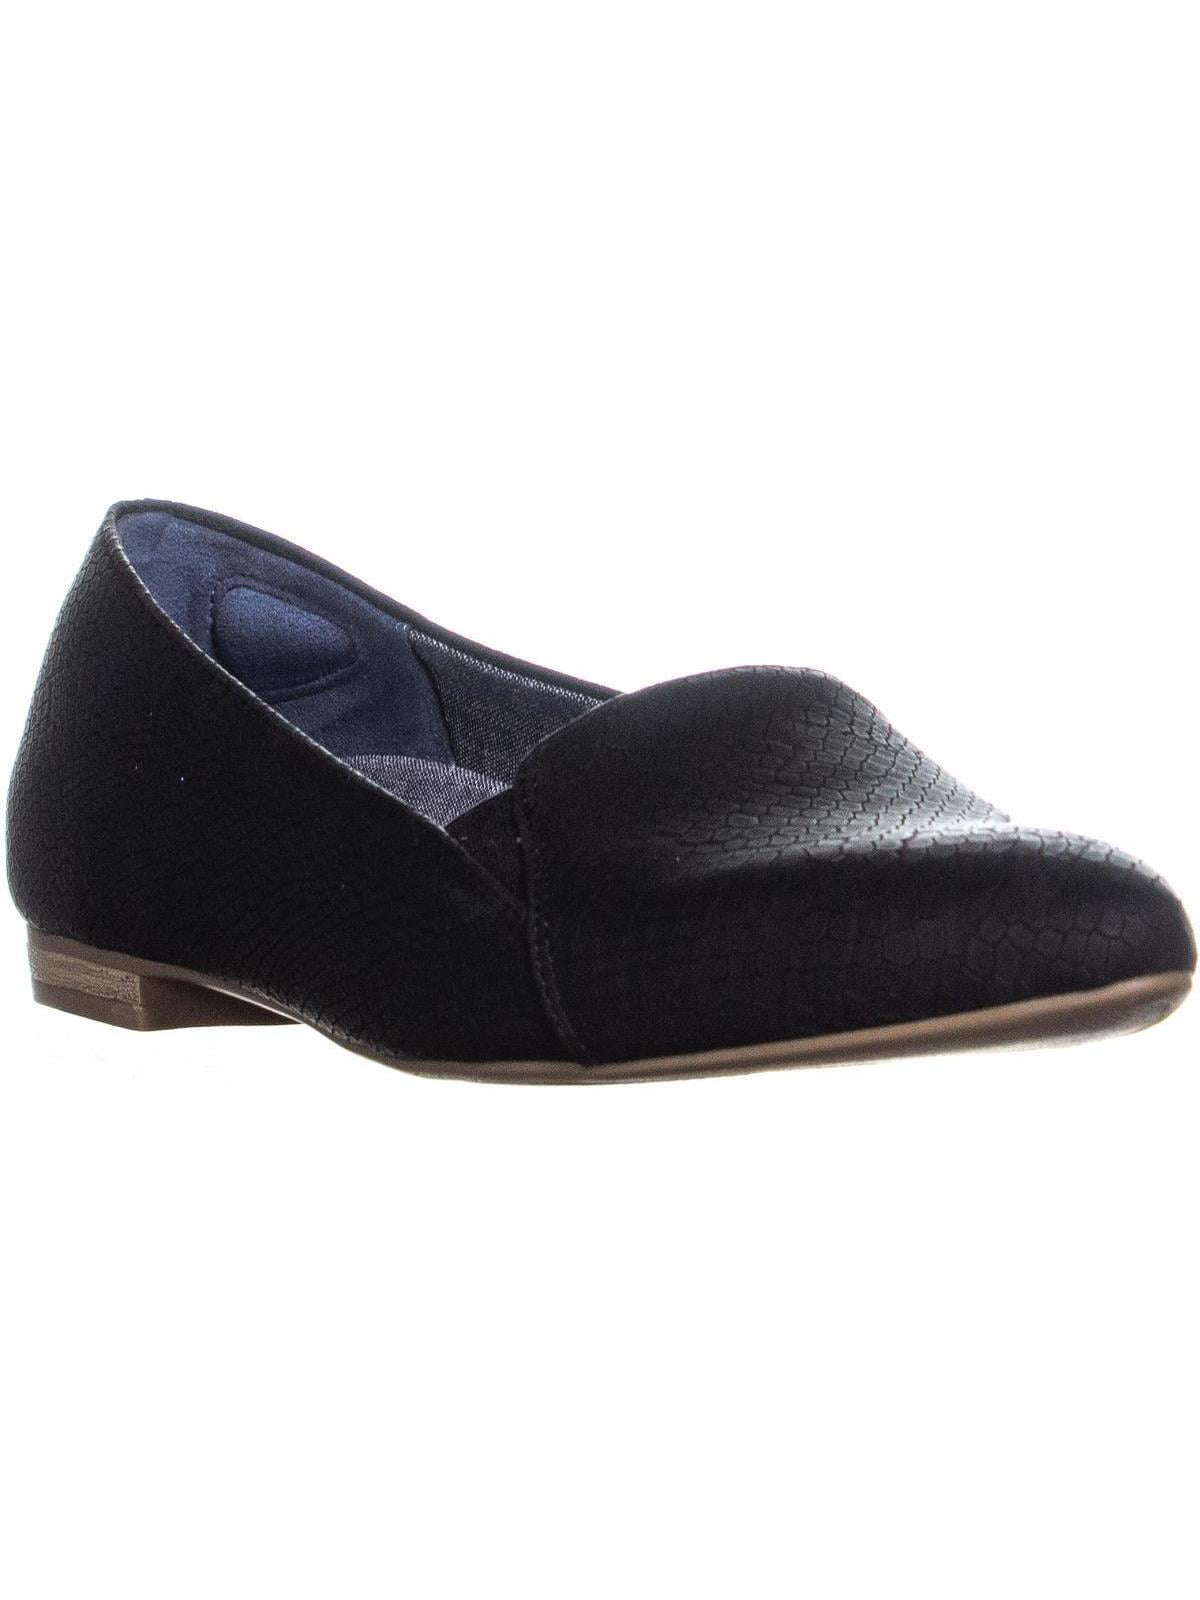 dr scholl's black loafers